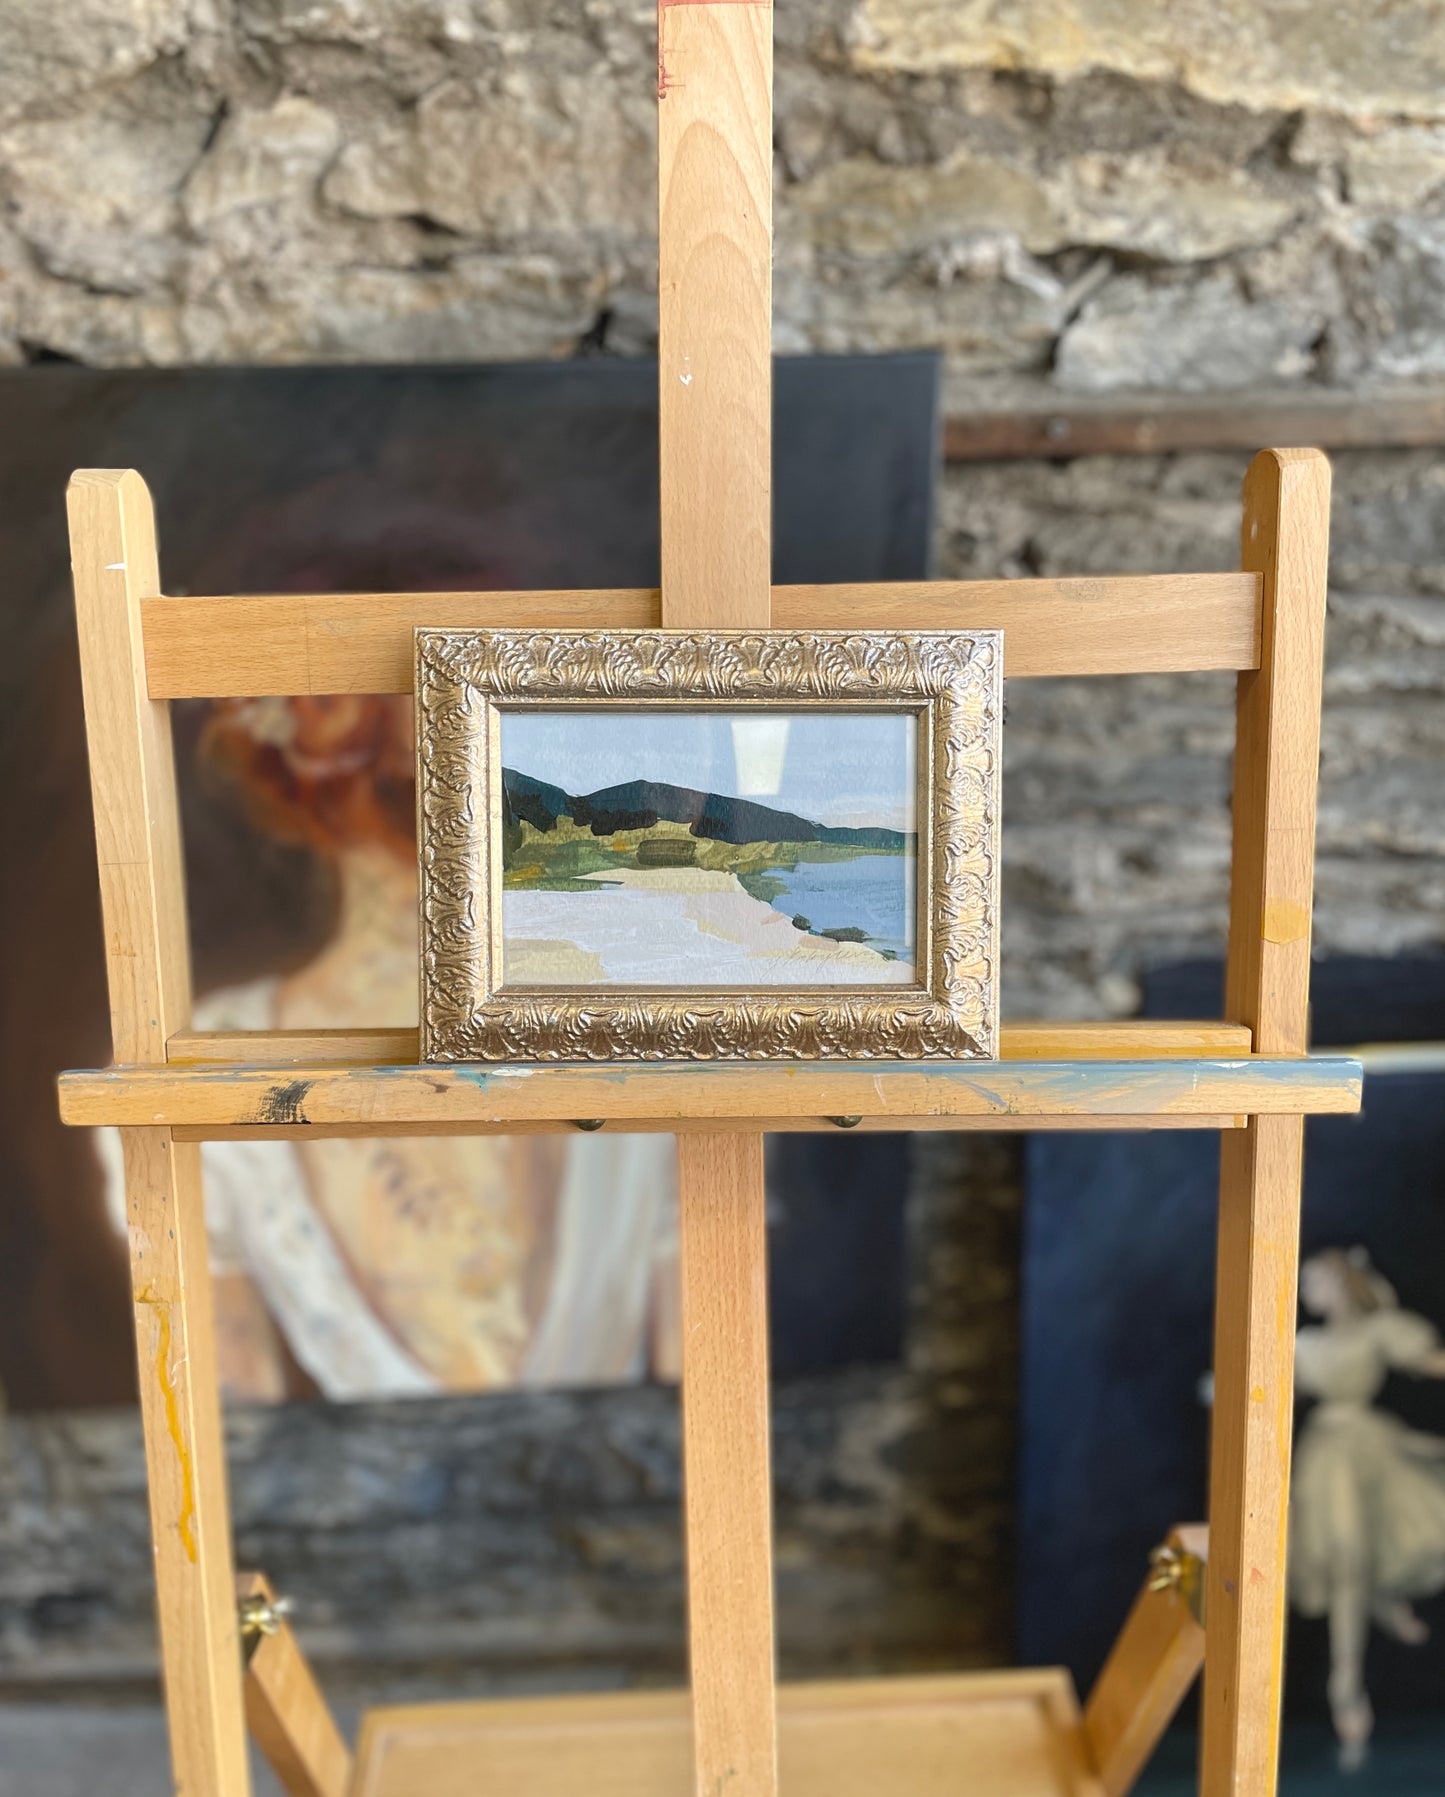 A small, framed artwork featuring an abstract landscape of a mountain and tranquil body of water.